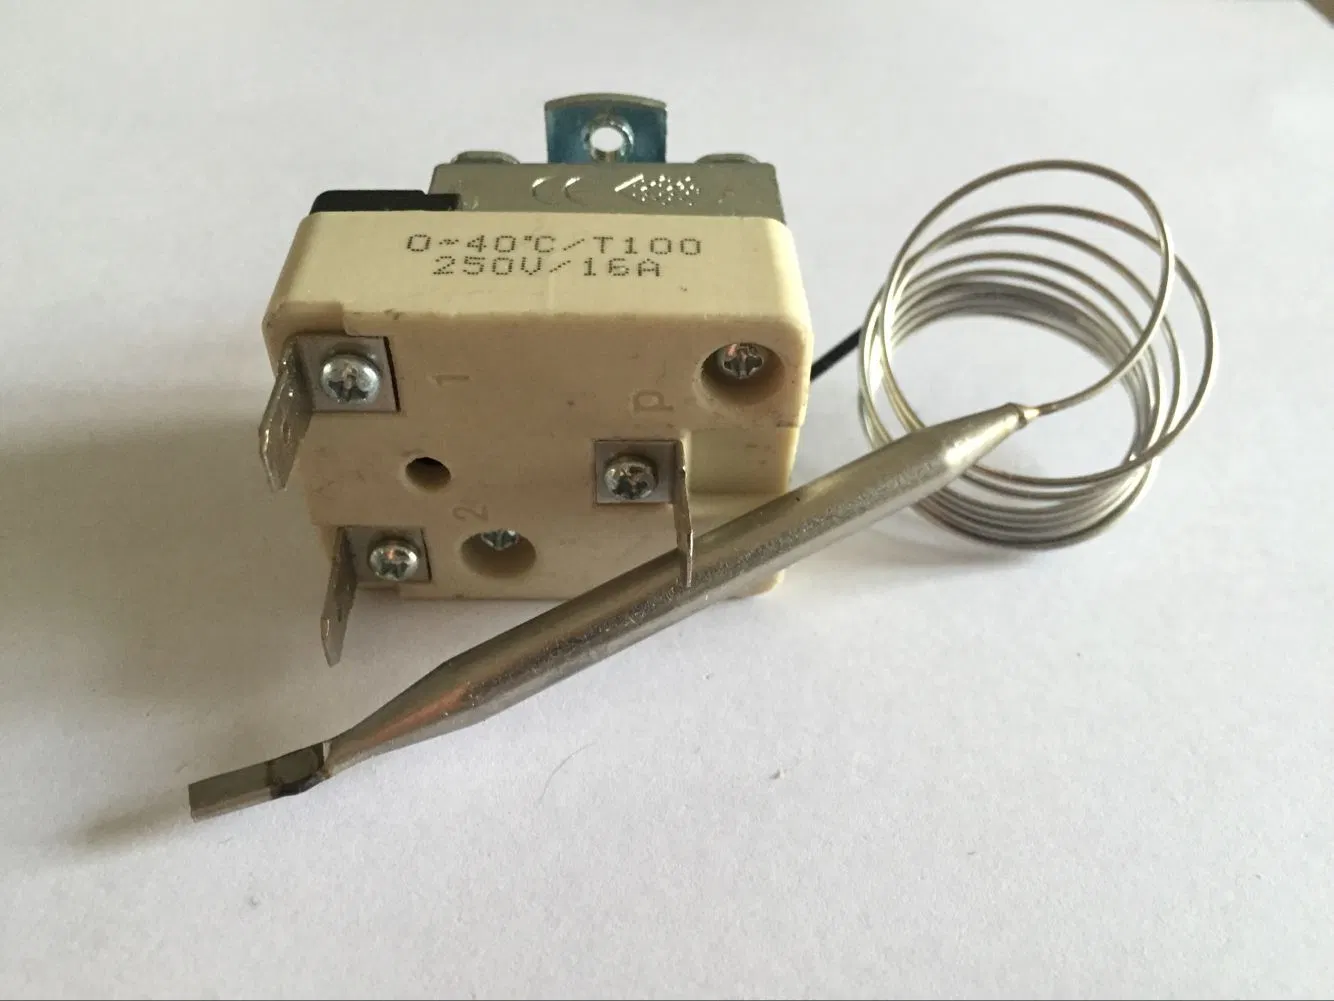 Custom Mechanical Water Heater Tempering Switch Capillary Thermostat - 220V Adjustable Temperature Controller for Bathroom